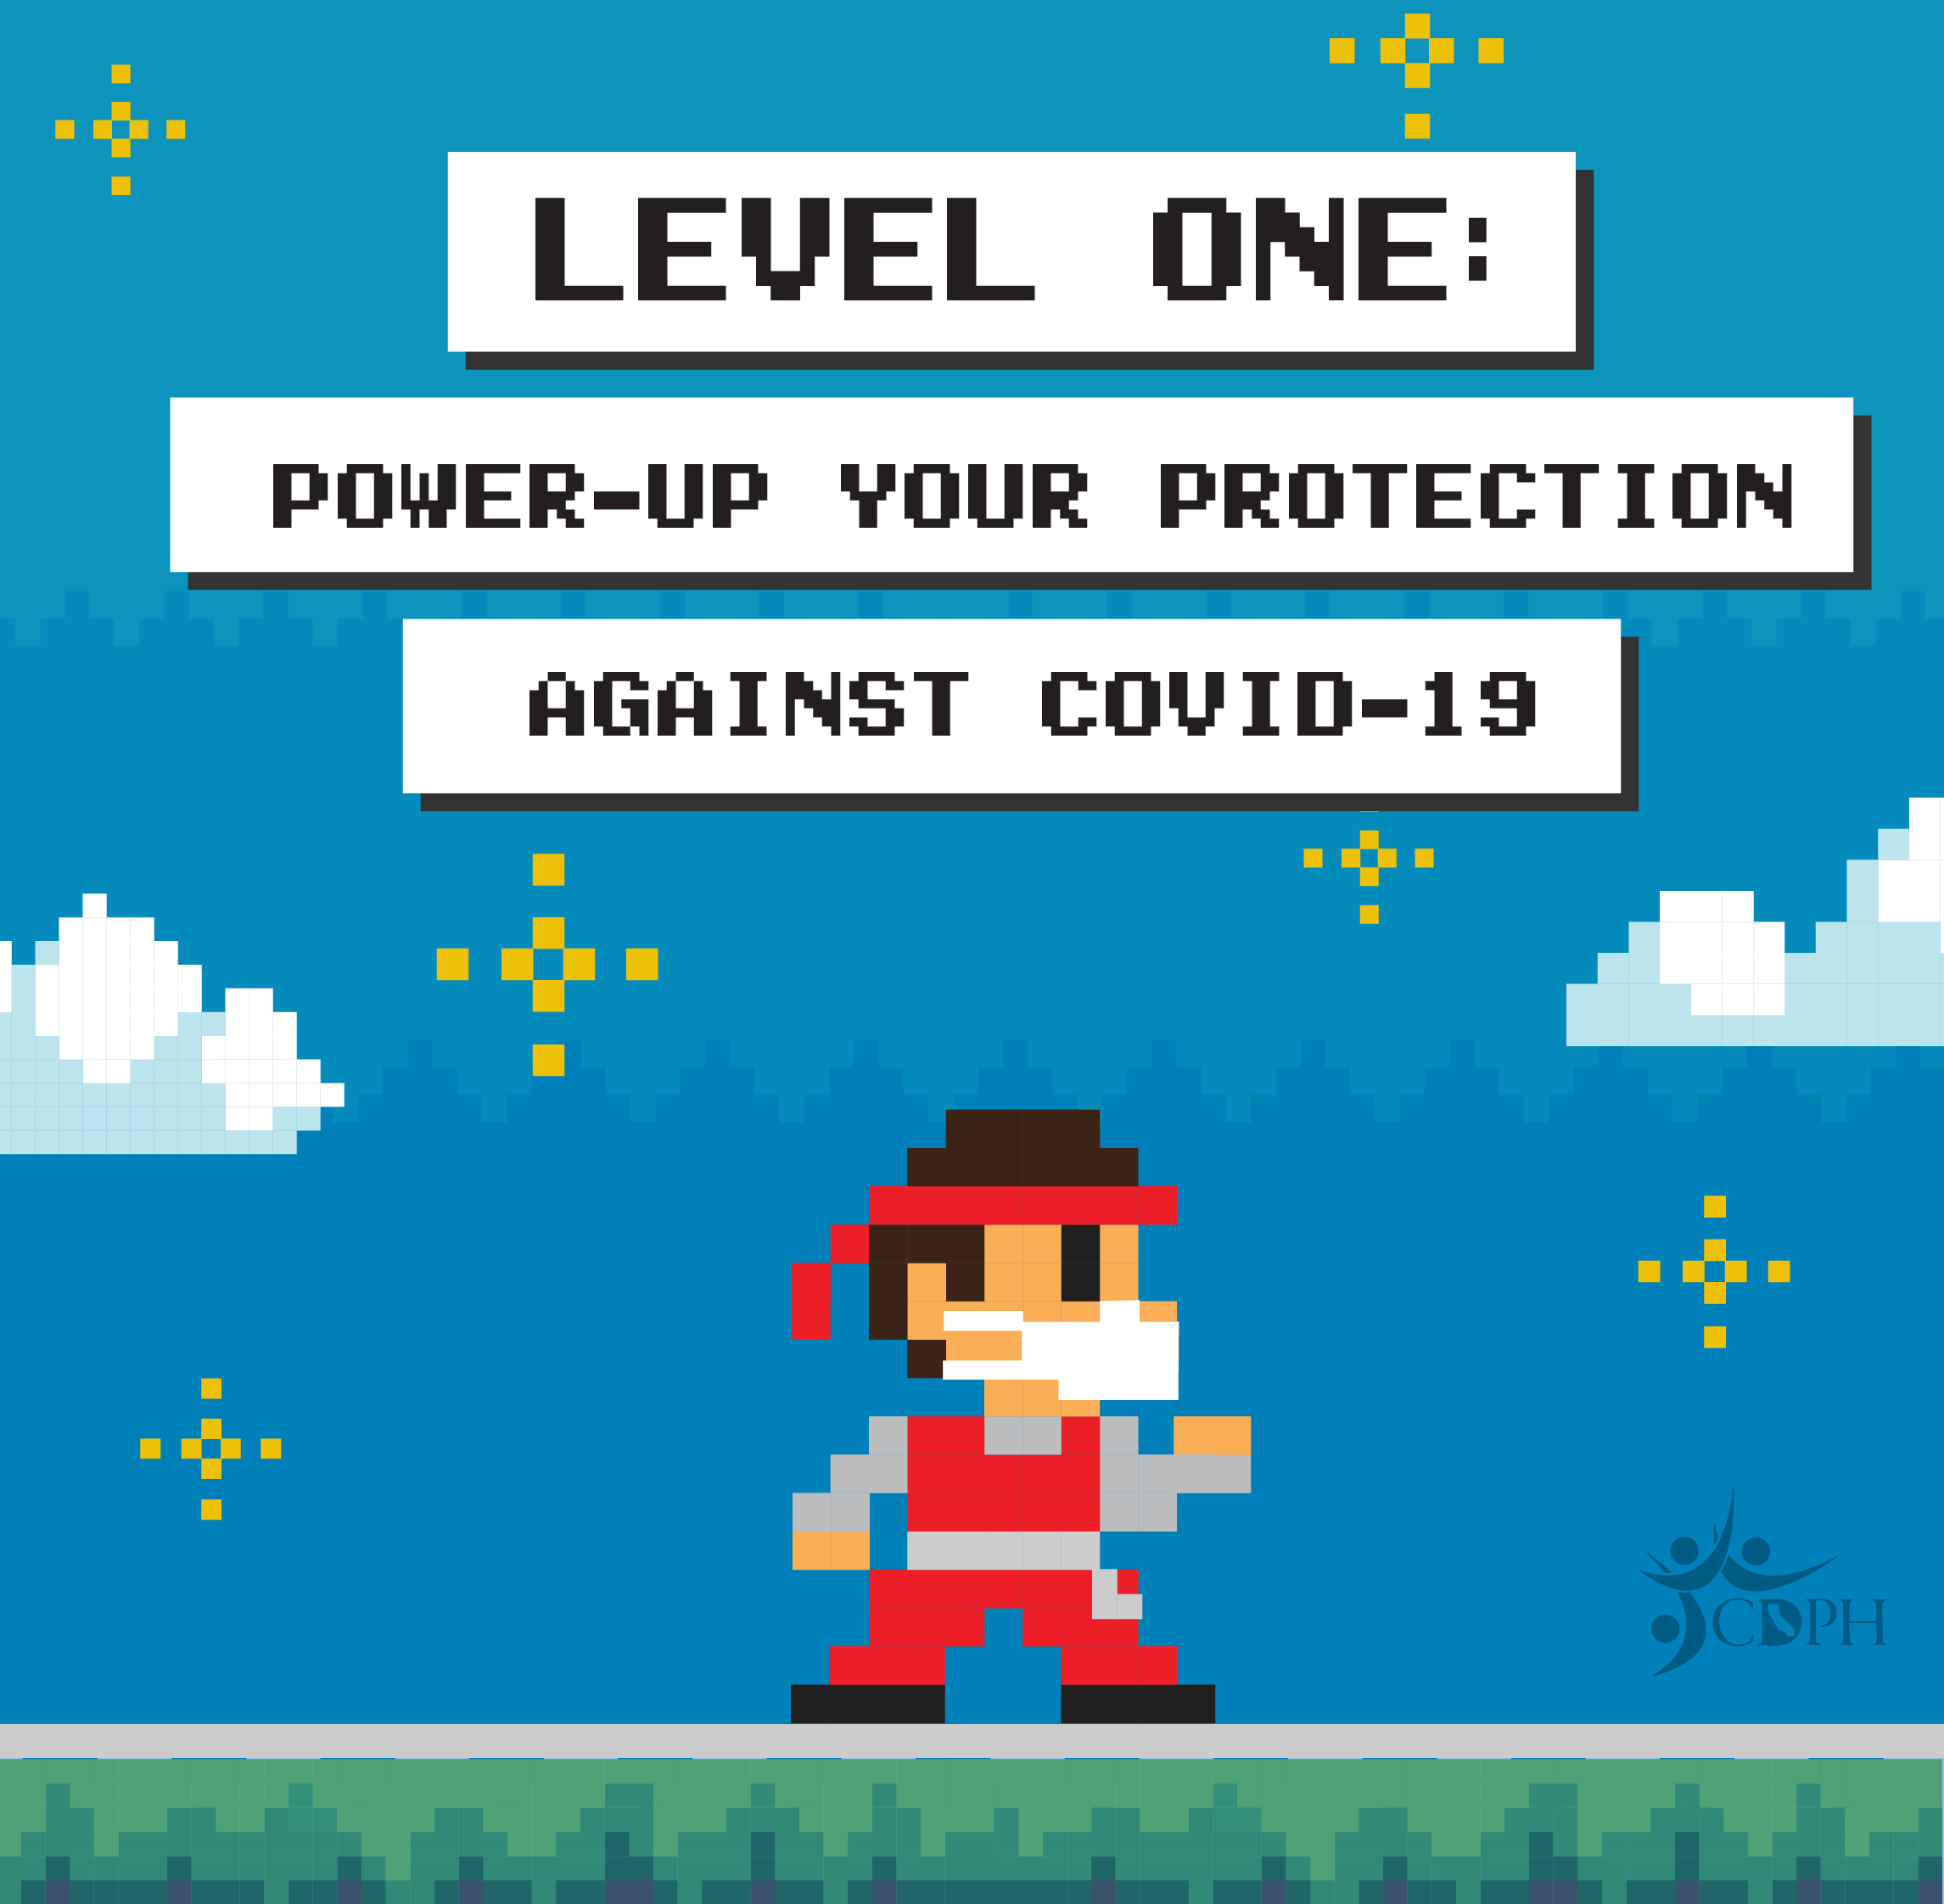 Level one power-up your protection against COVID-19